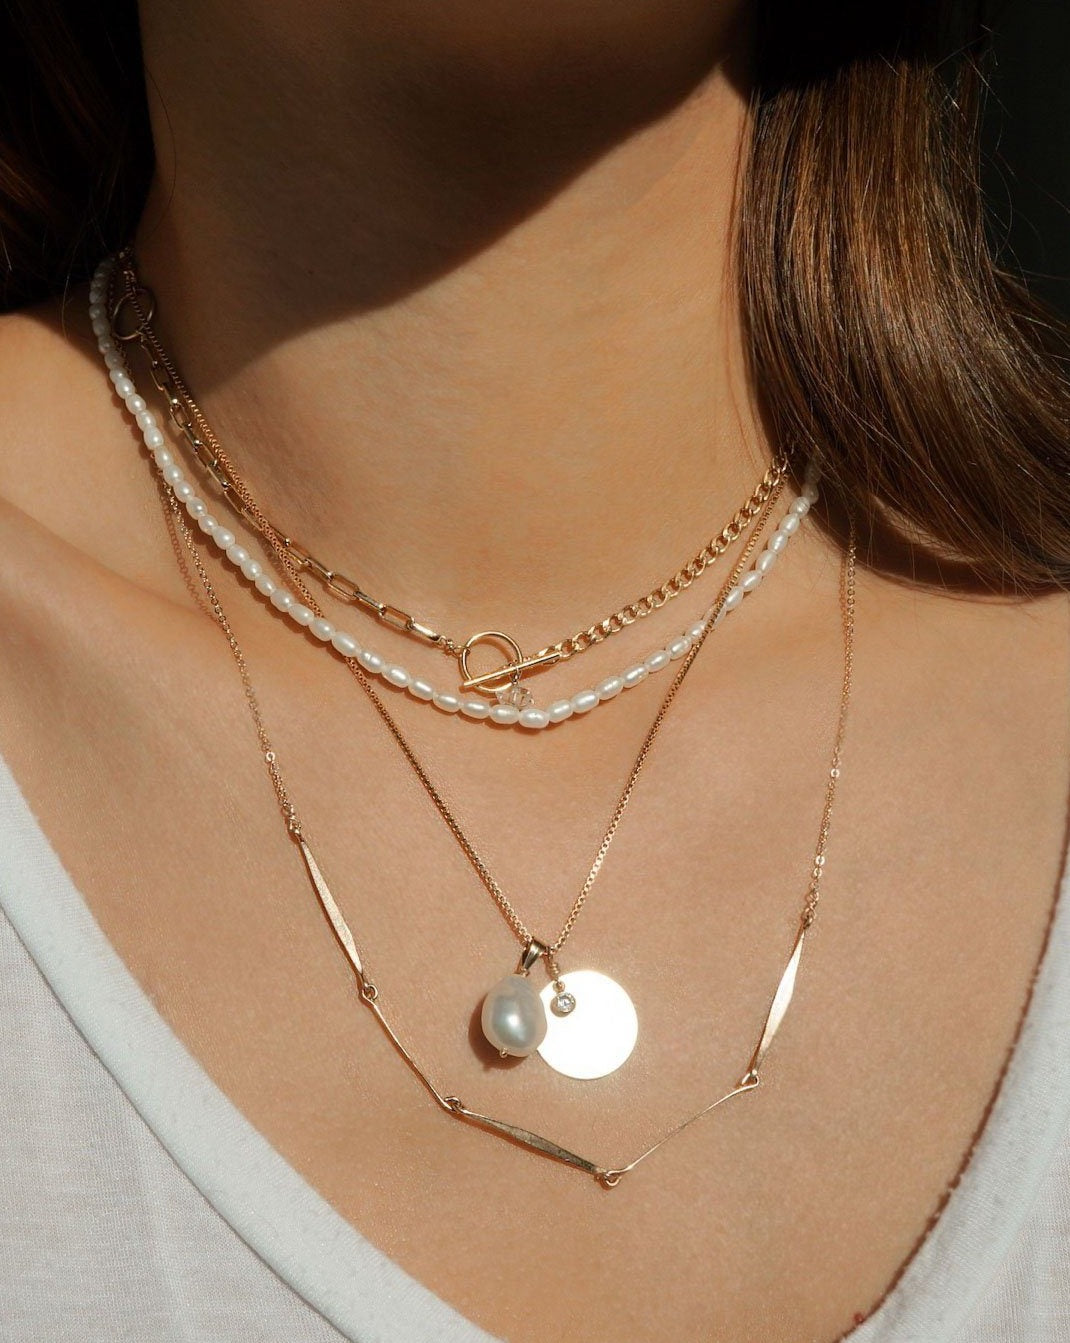 Titi Necklace by KOZAKH. A 16 inches long necklace, crafted in 14K Gold Filled, featuring a Herkimer Diamond.